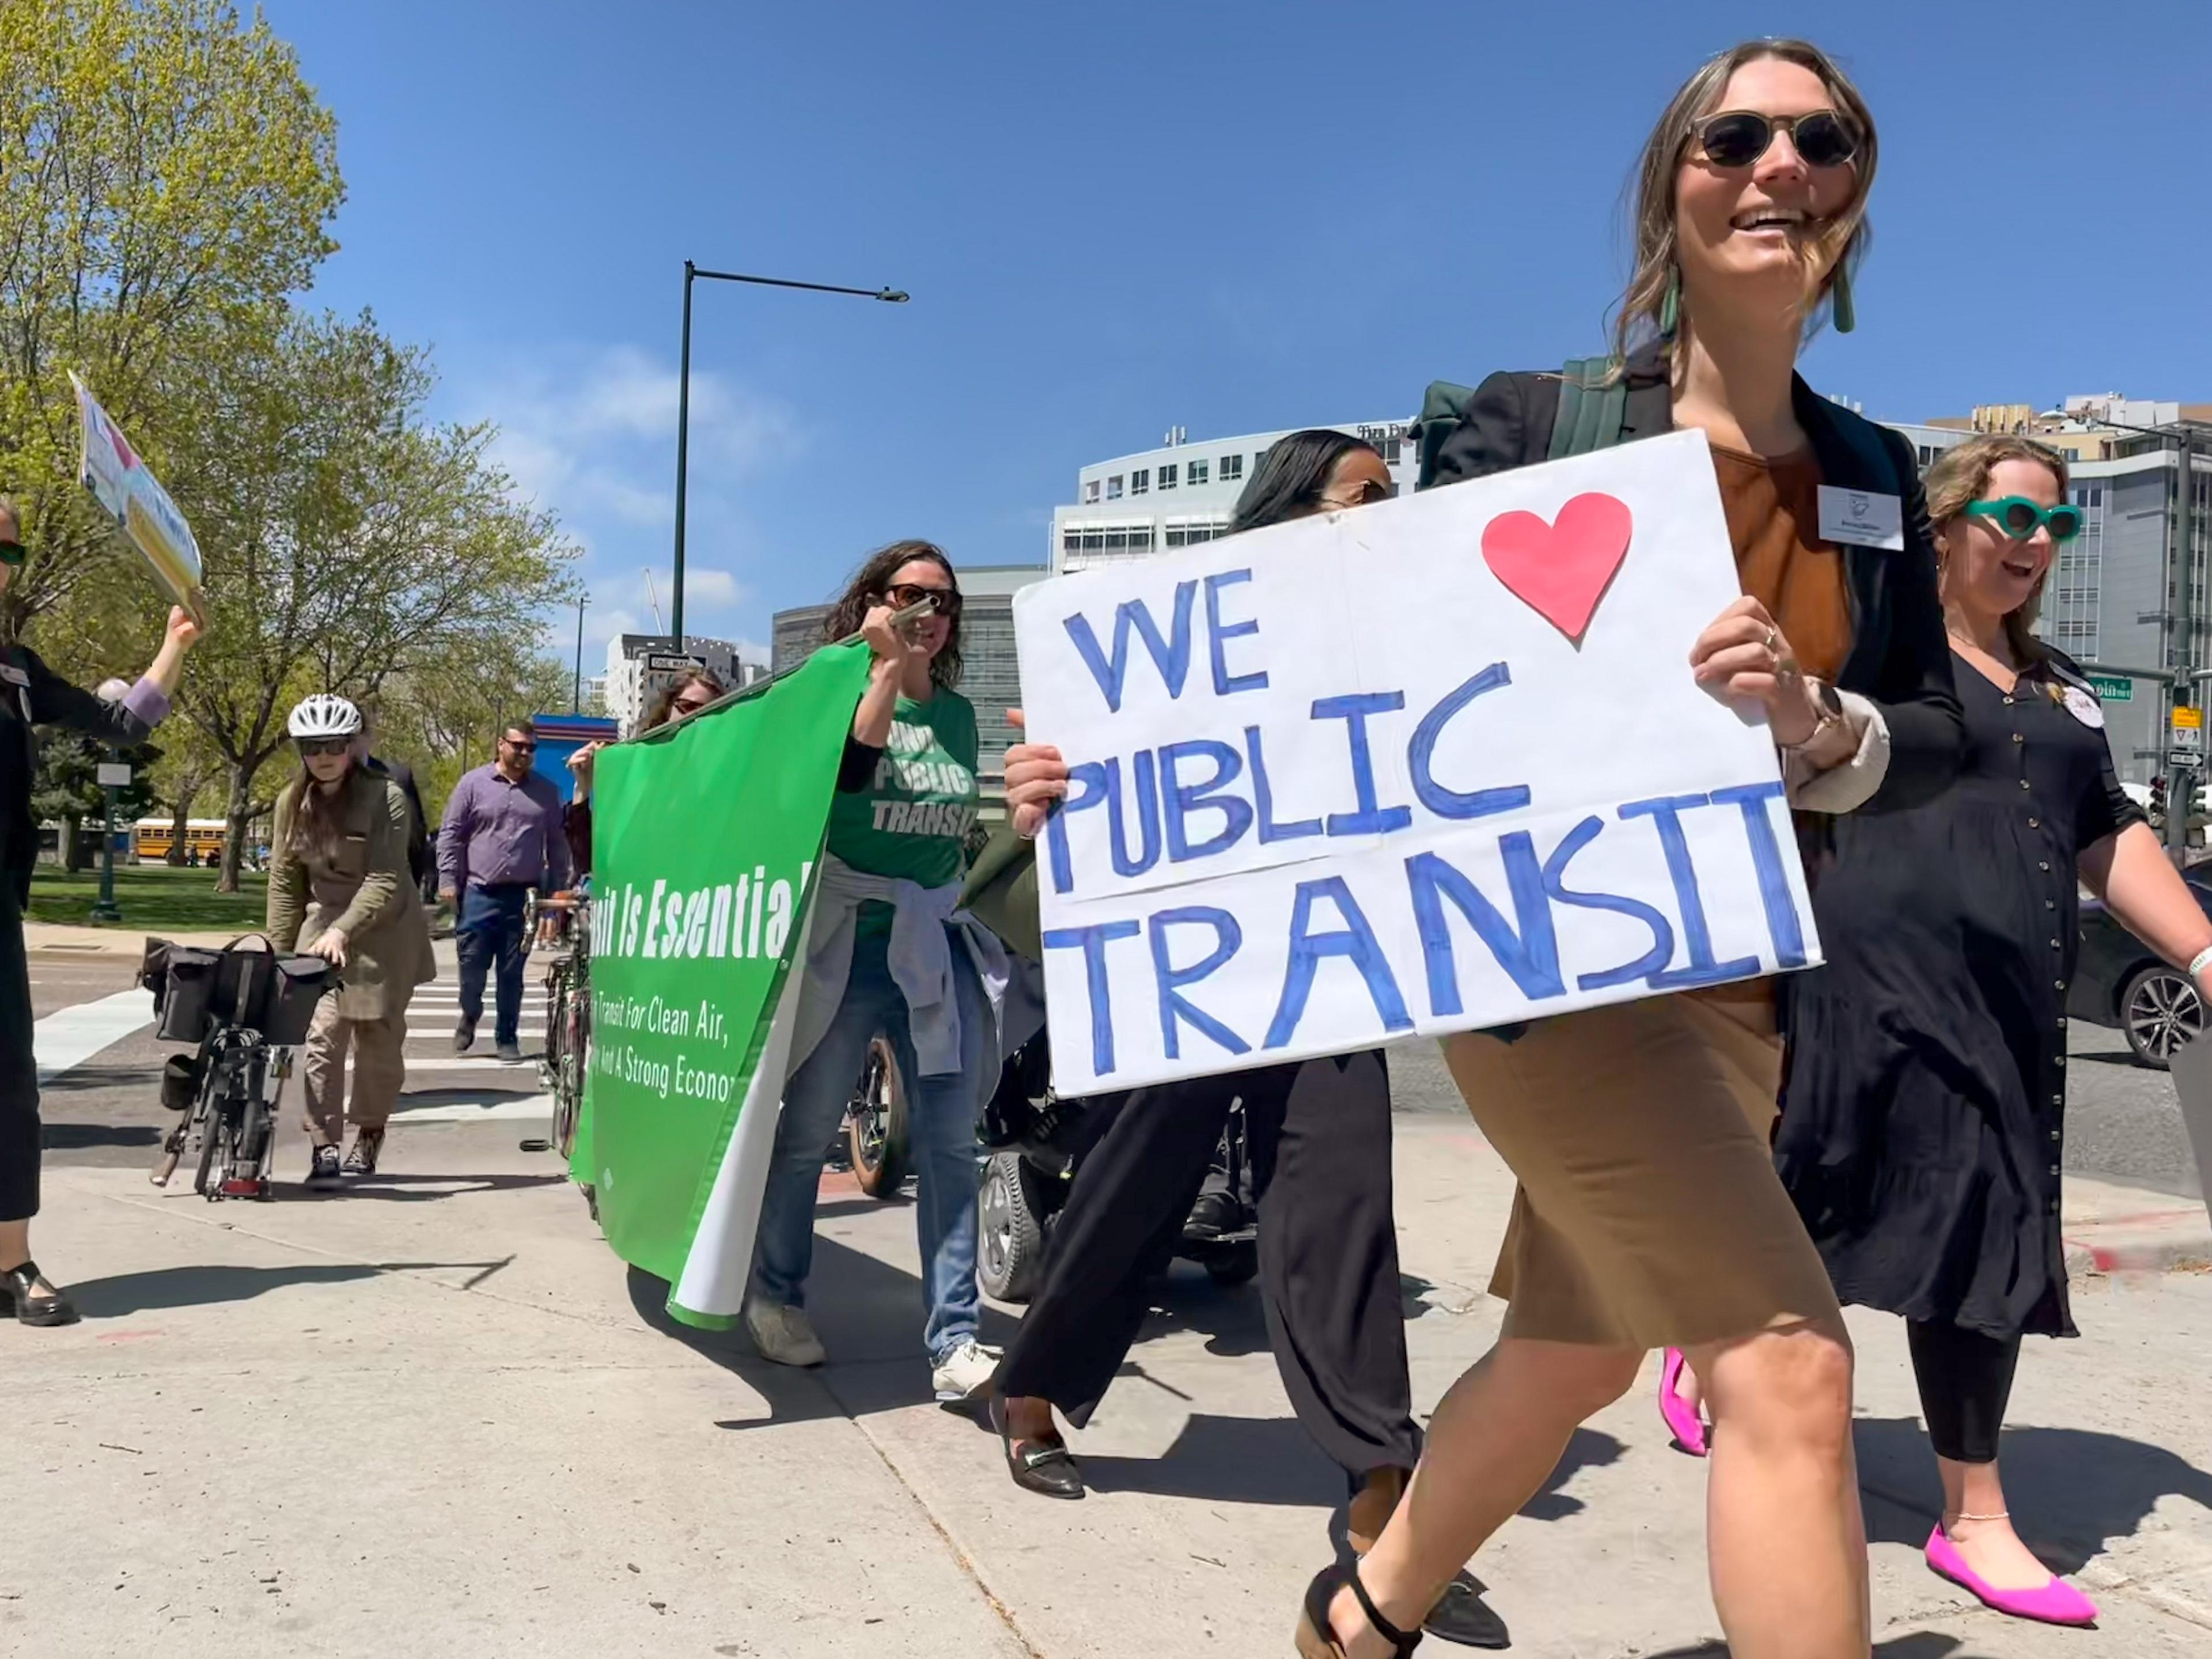 Public transit supporters carrying signs supporting air pollution bill that funds for RTD.